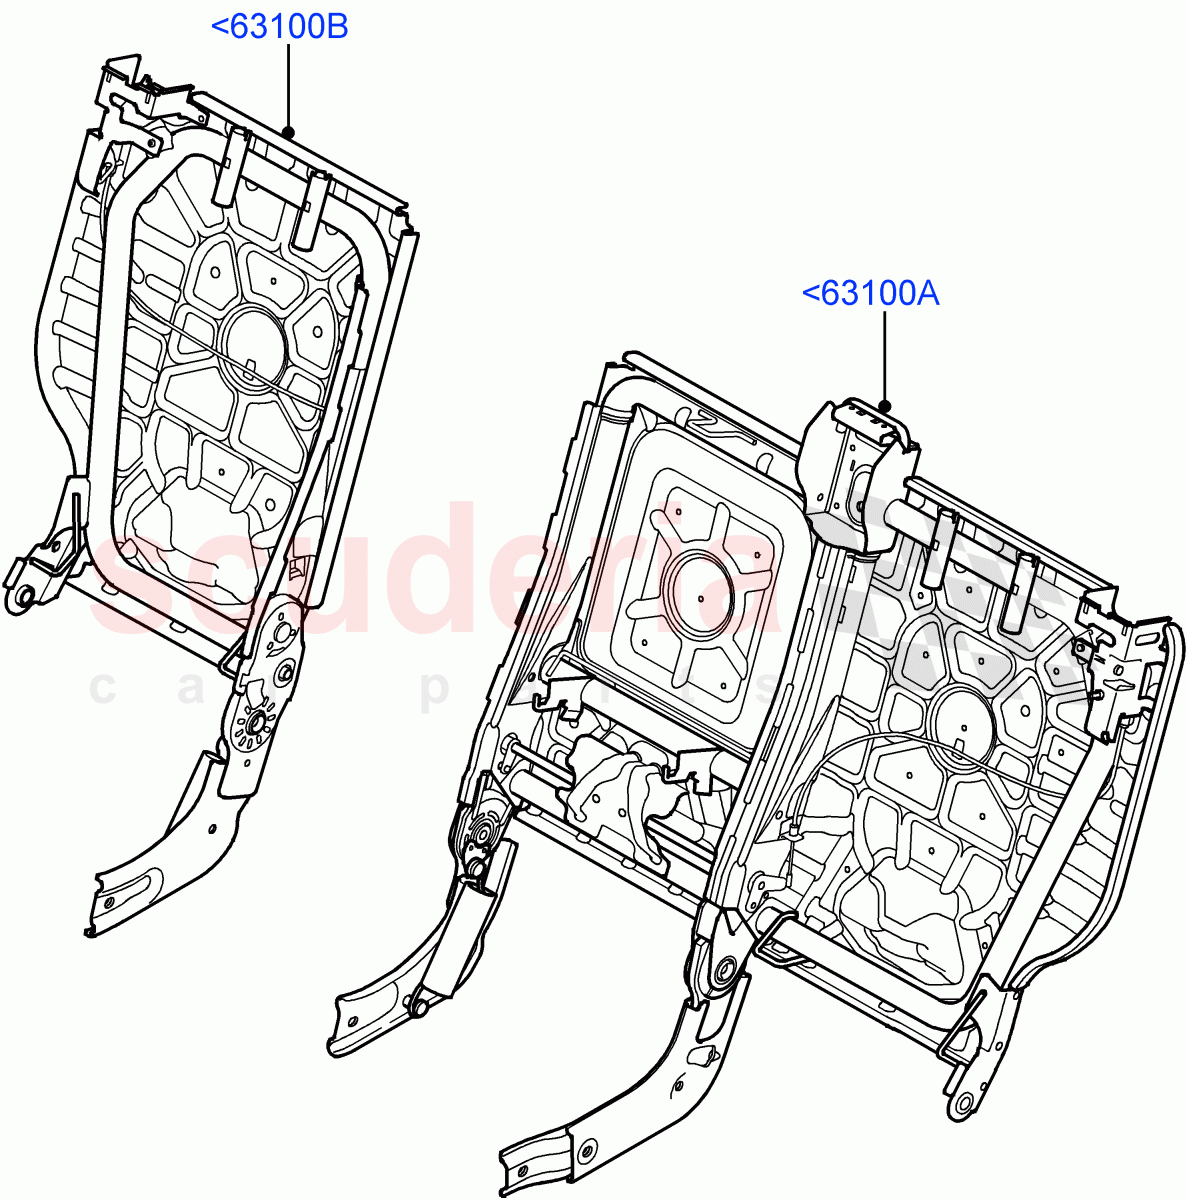 Rear Seat Back((V)TO9A999999) of Land Rover Land Rover Range Rover Sport (2005-2009) [4.2 Petrol V8 Supercharged]